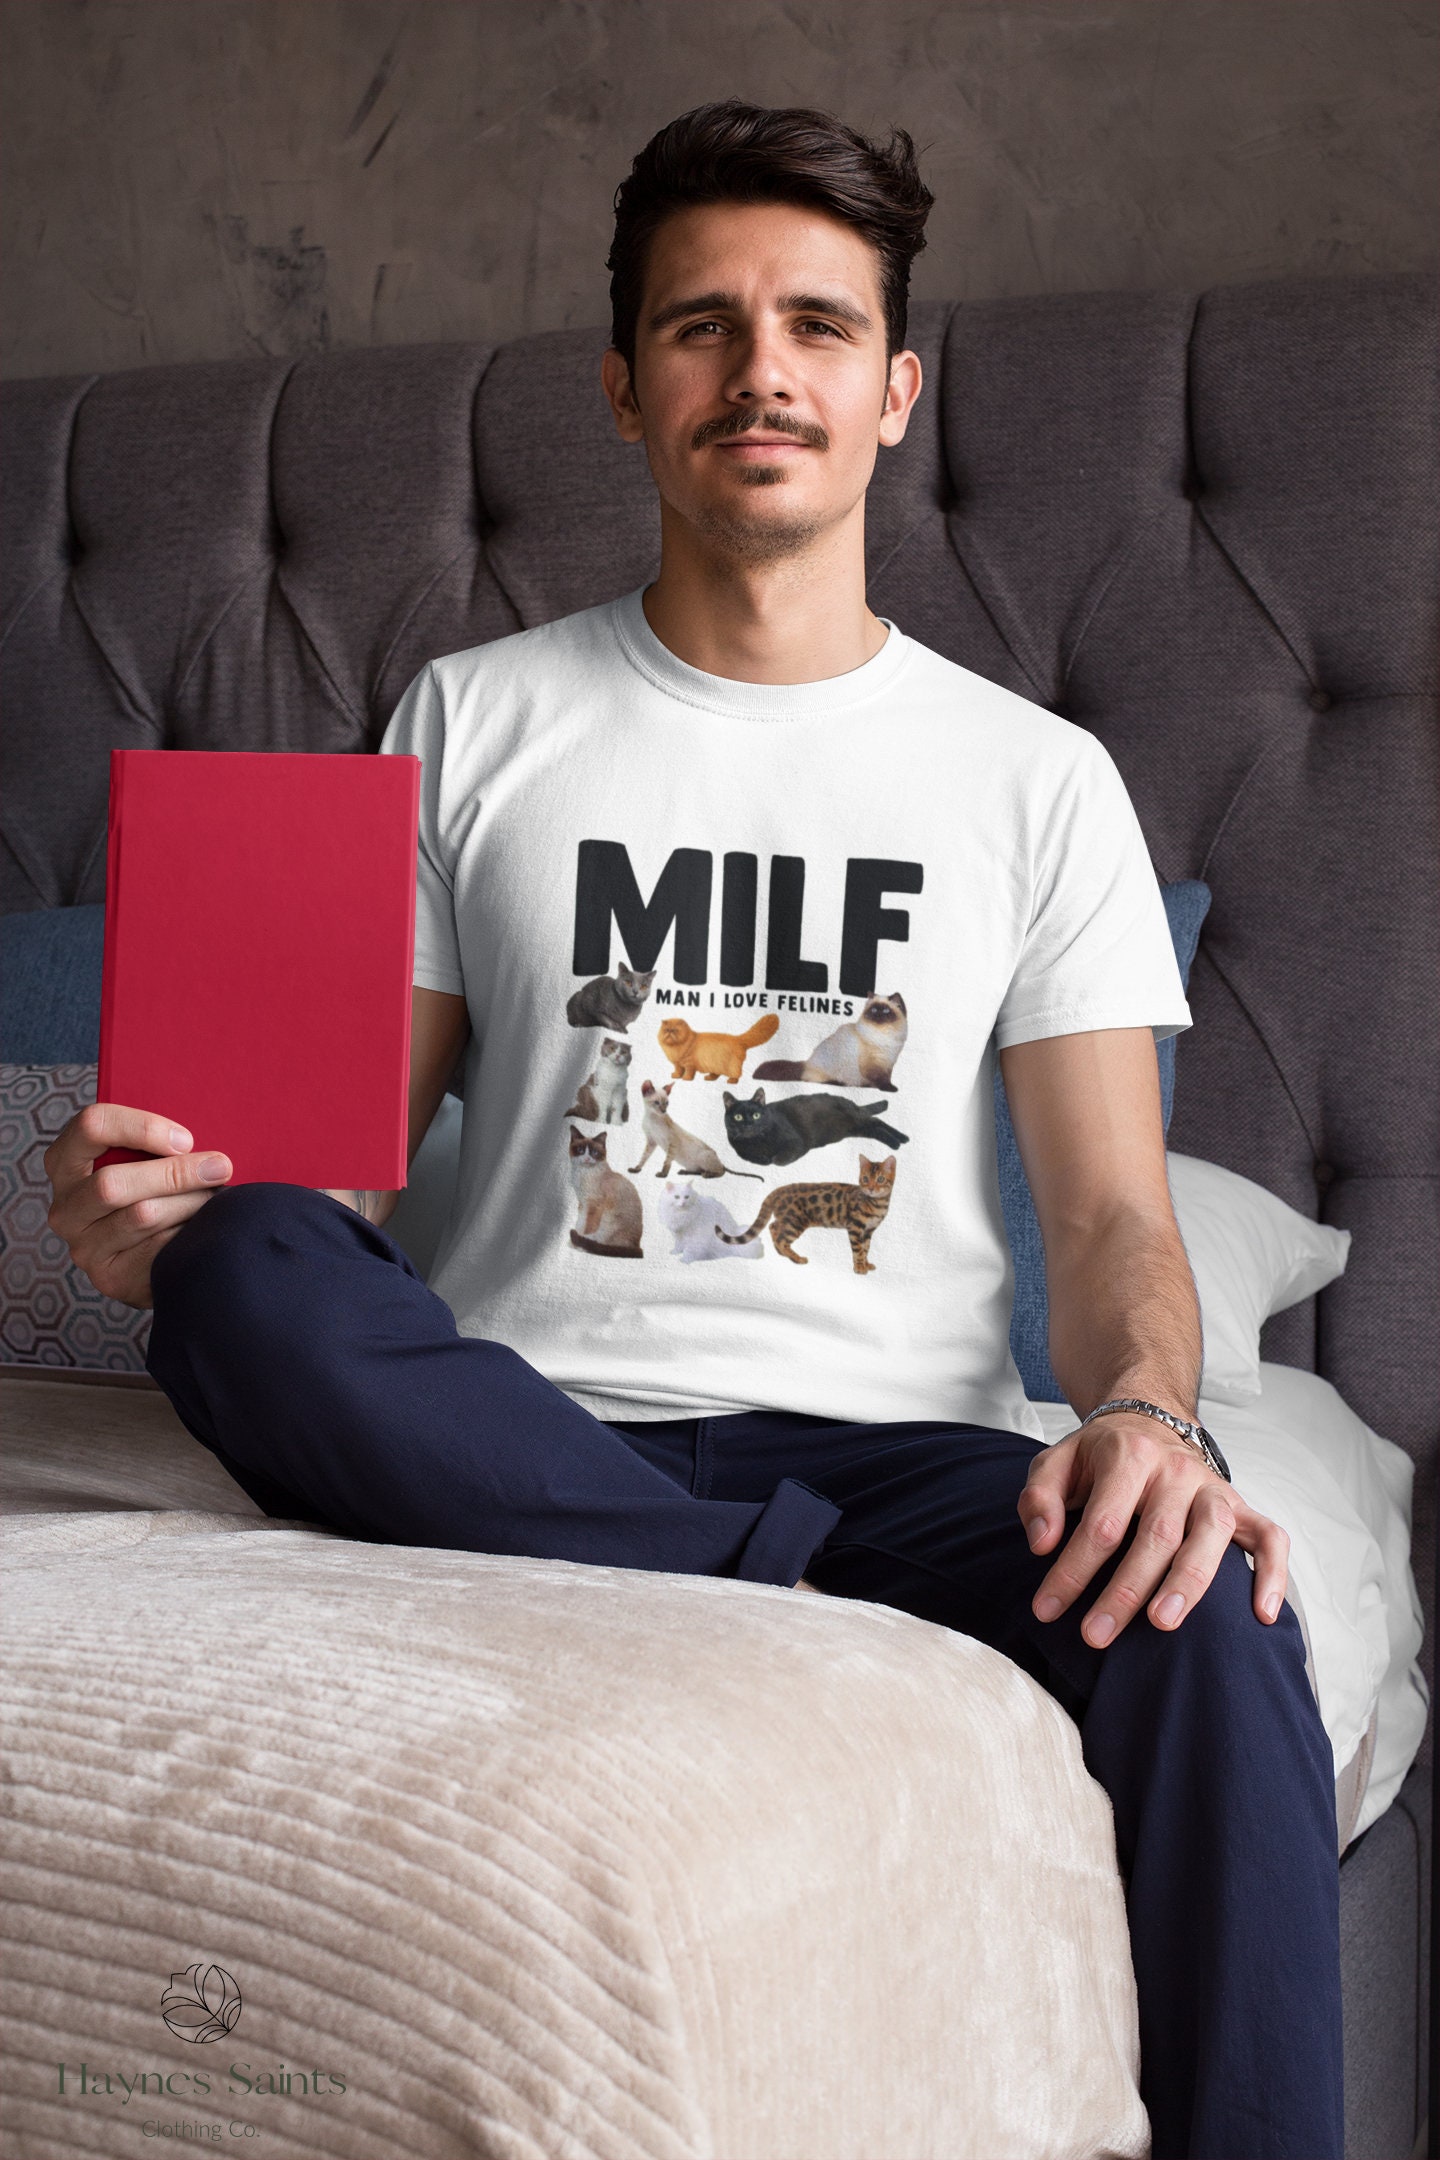 Discover Milf Man I Love Felines Funny Cats T-Shirt, Cat Shirt, Cat Lover Shirt, Man I Love Felines Shirt, Milf Shirt, Funny Cat Gift Shirts